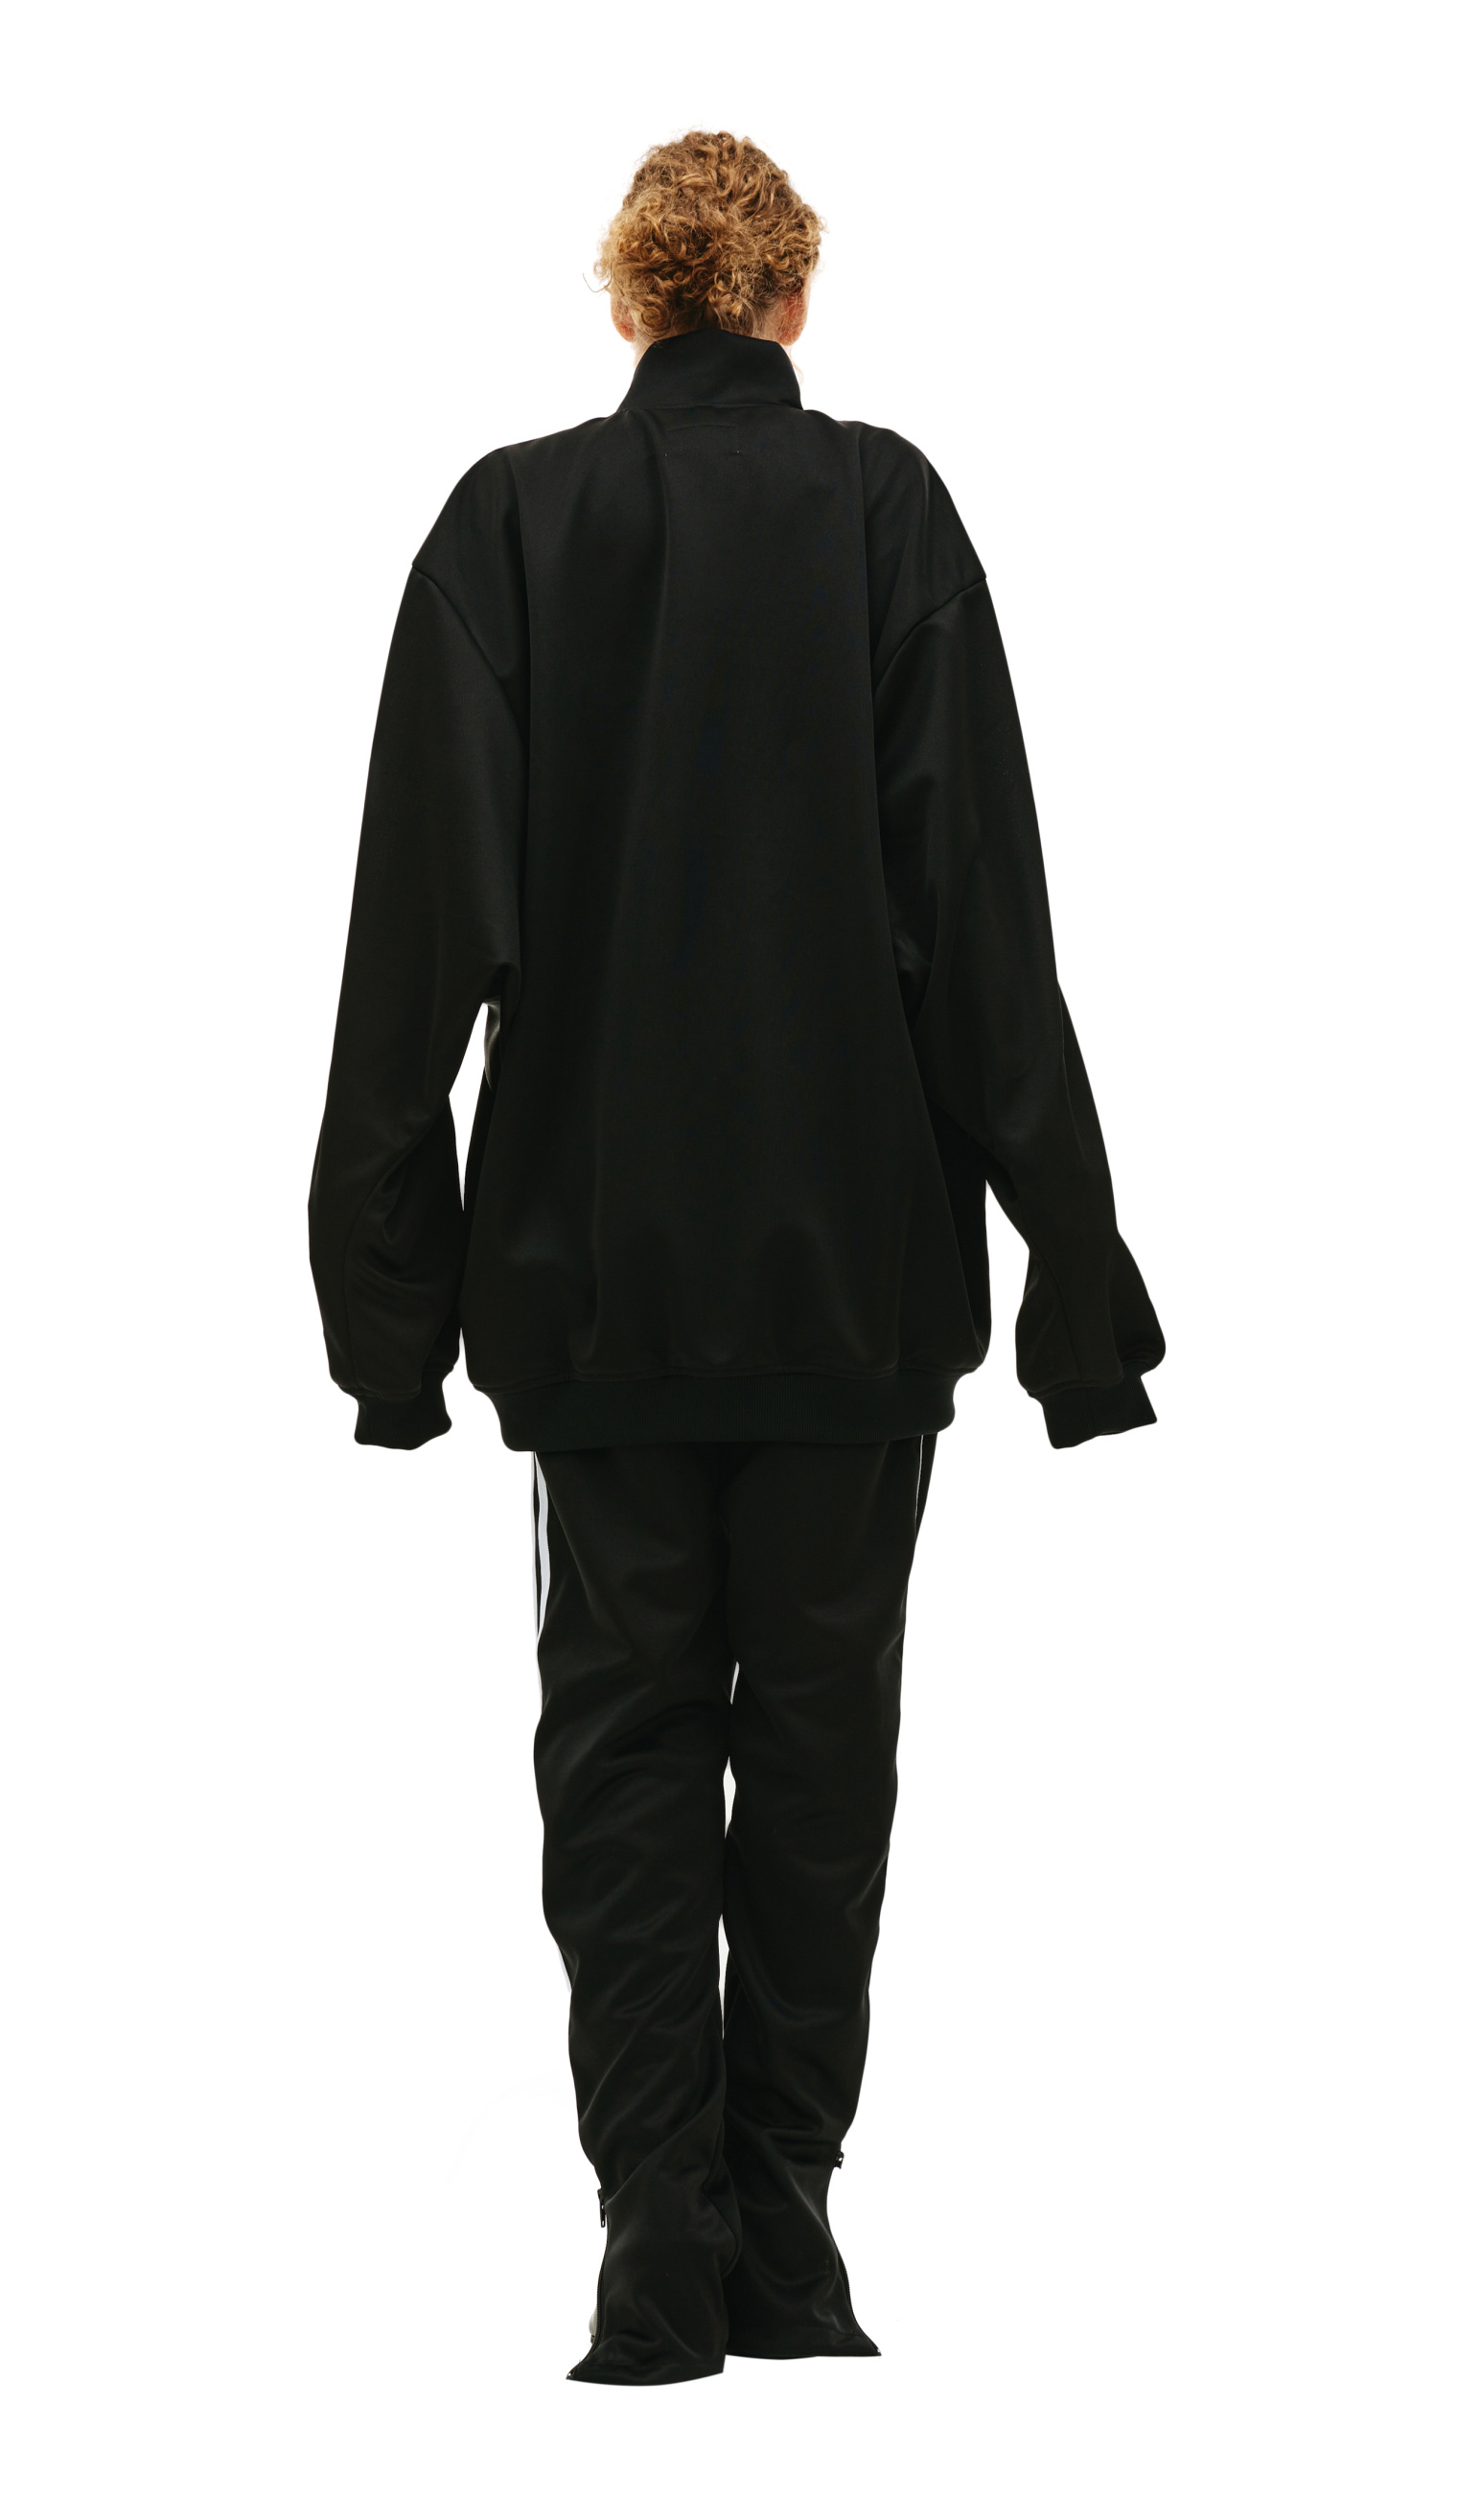 Buy Doublet women black invisible track jacket for $590 online on